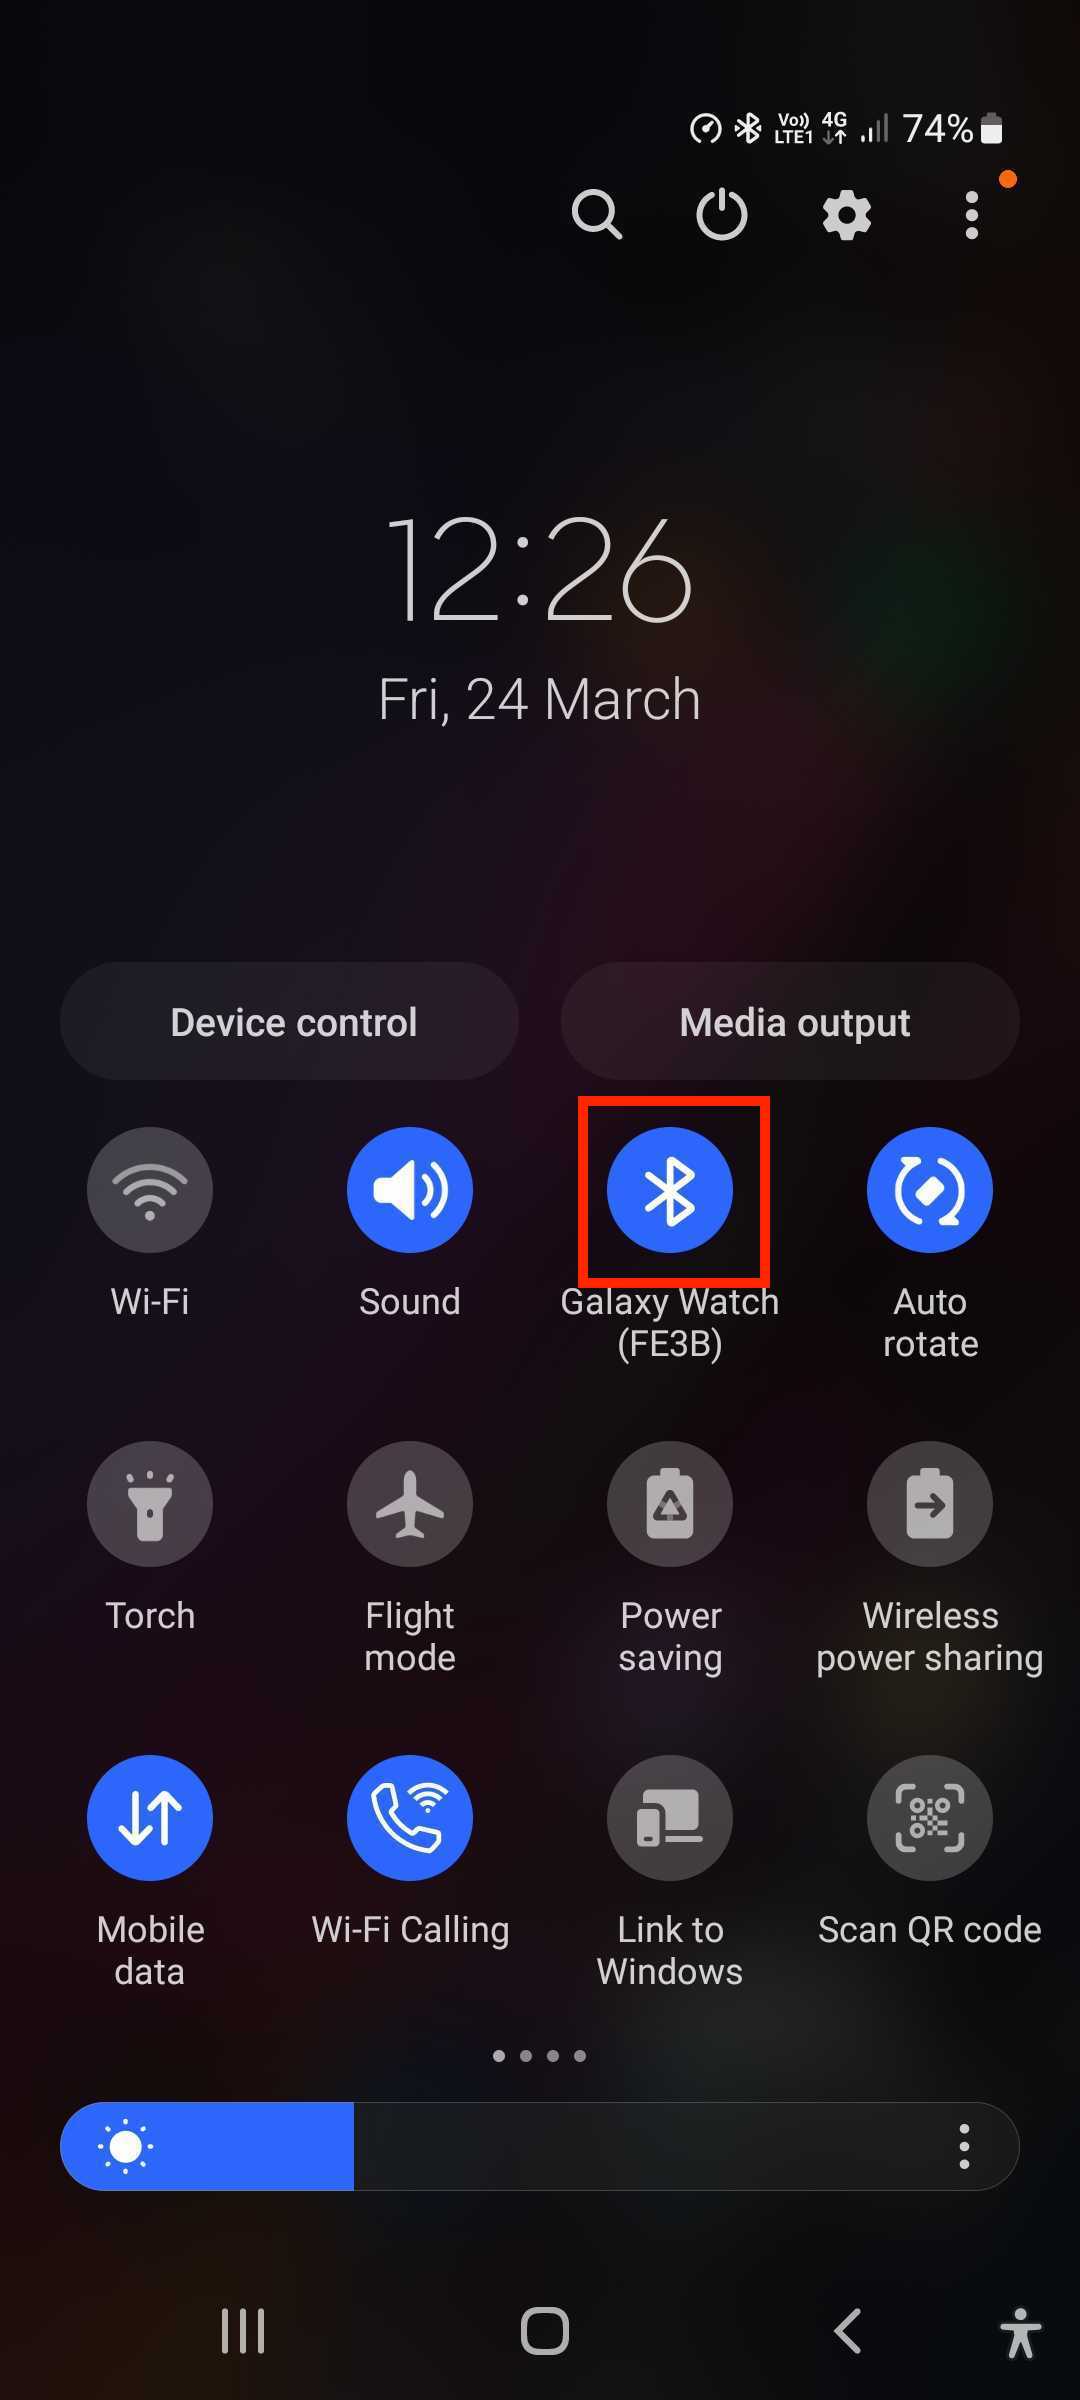 Enable Bluetooth on Android device